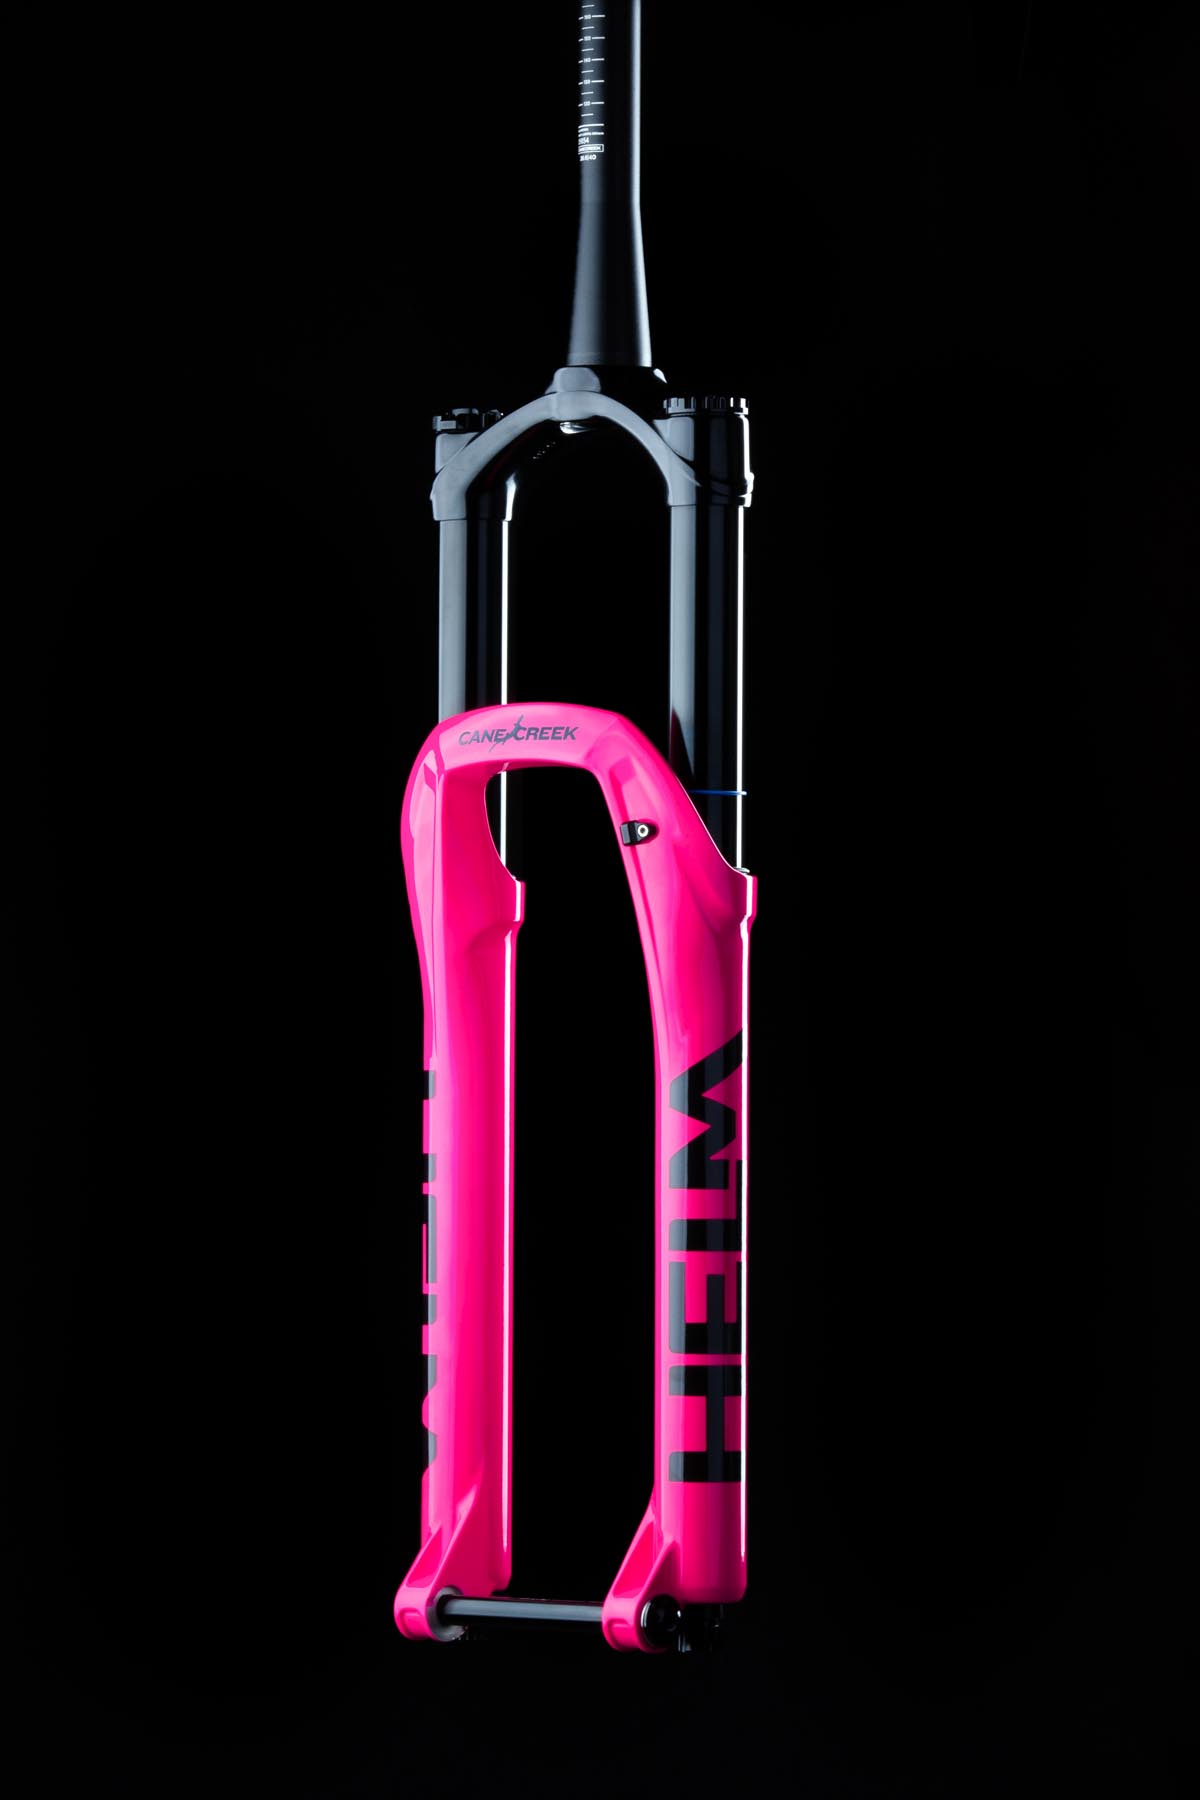 HELM MKII limited edition pink